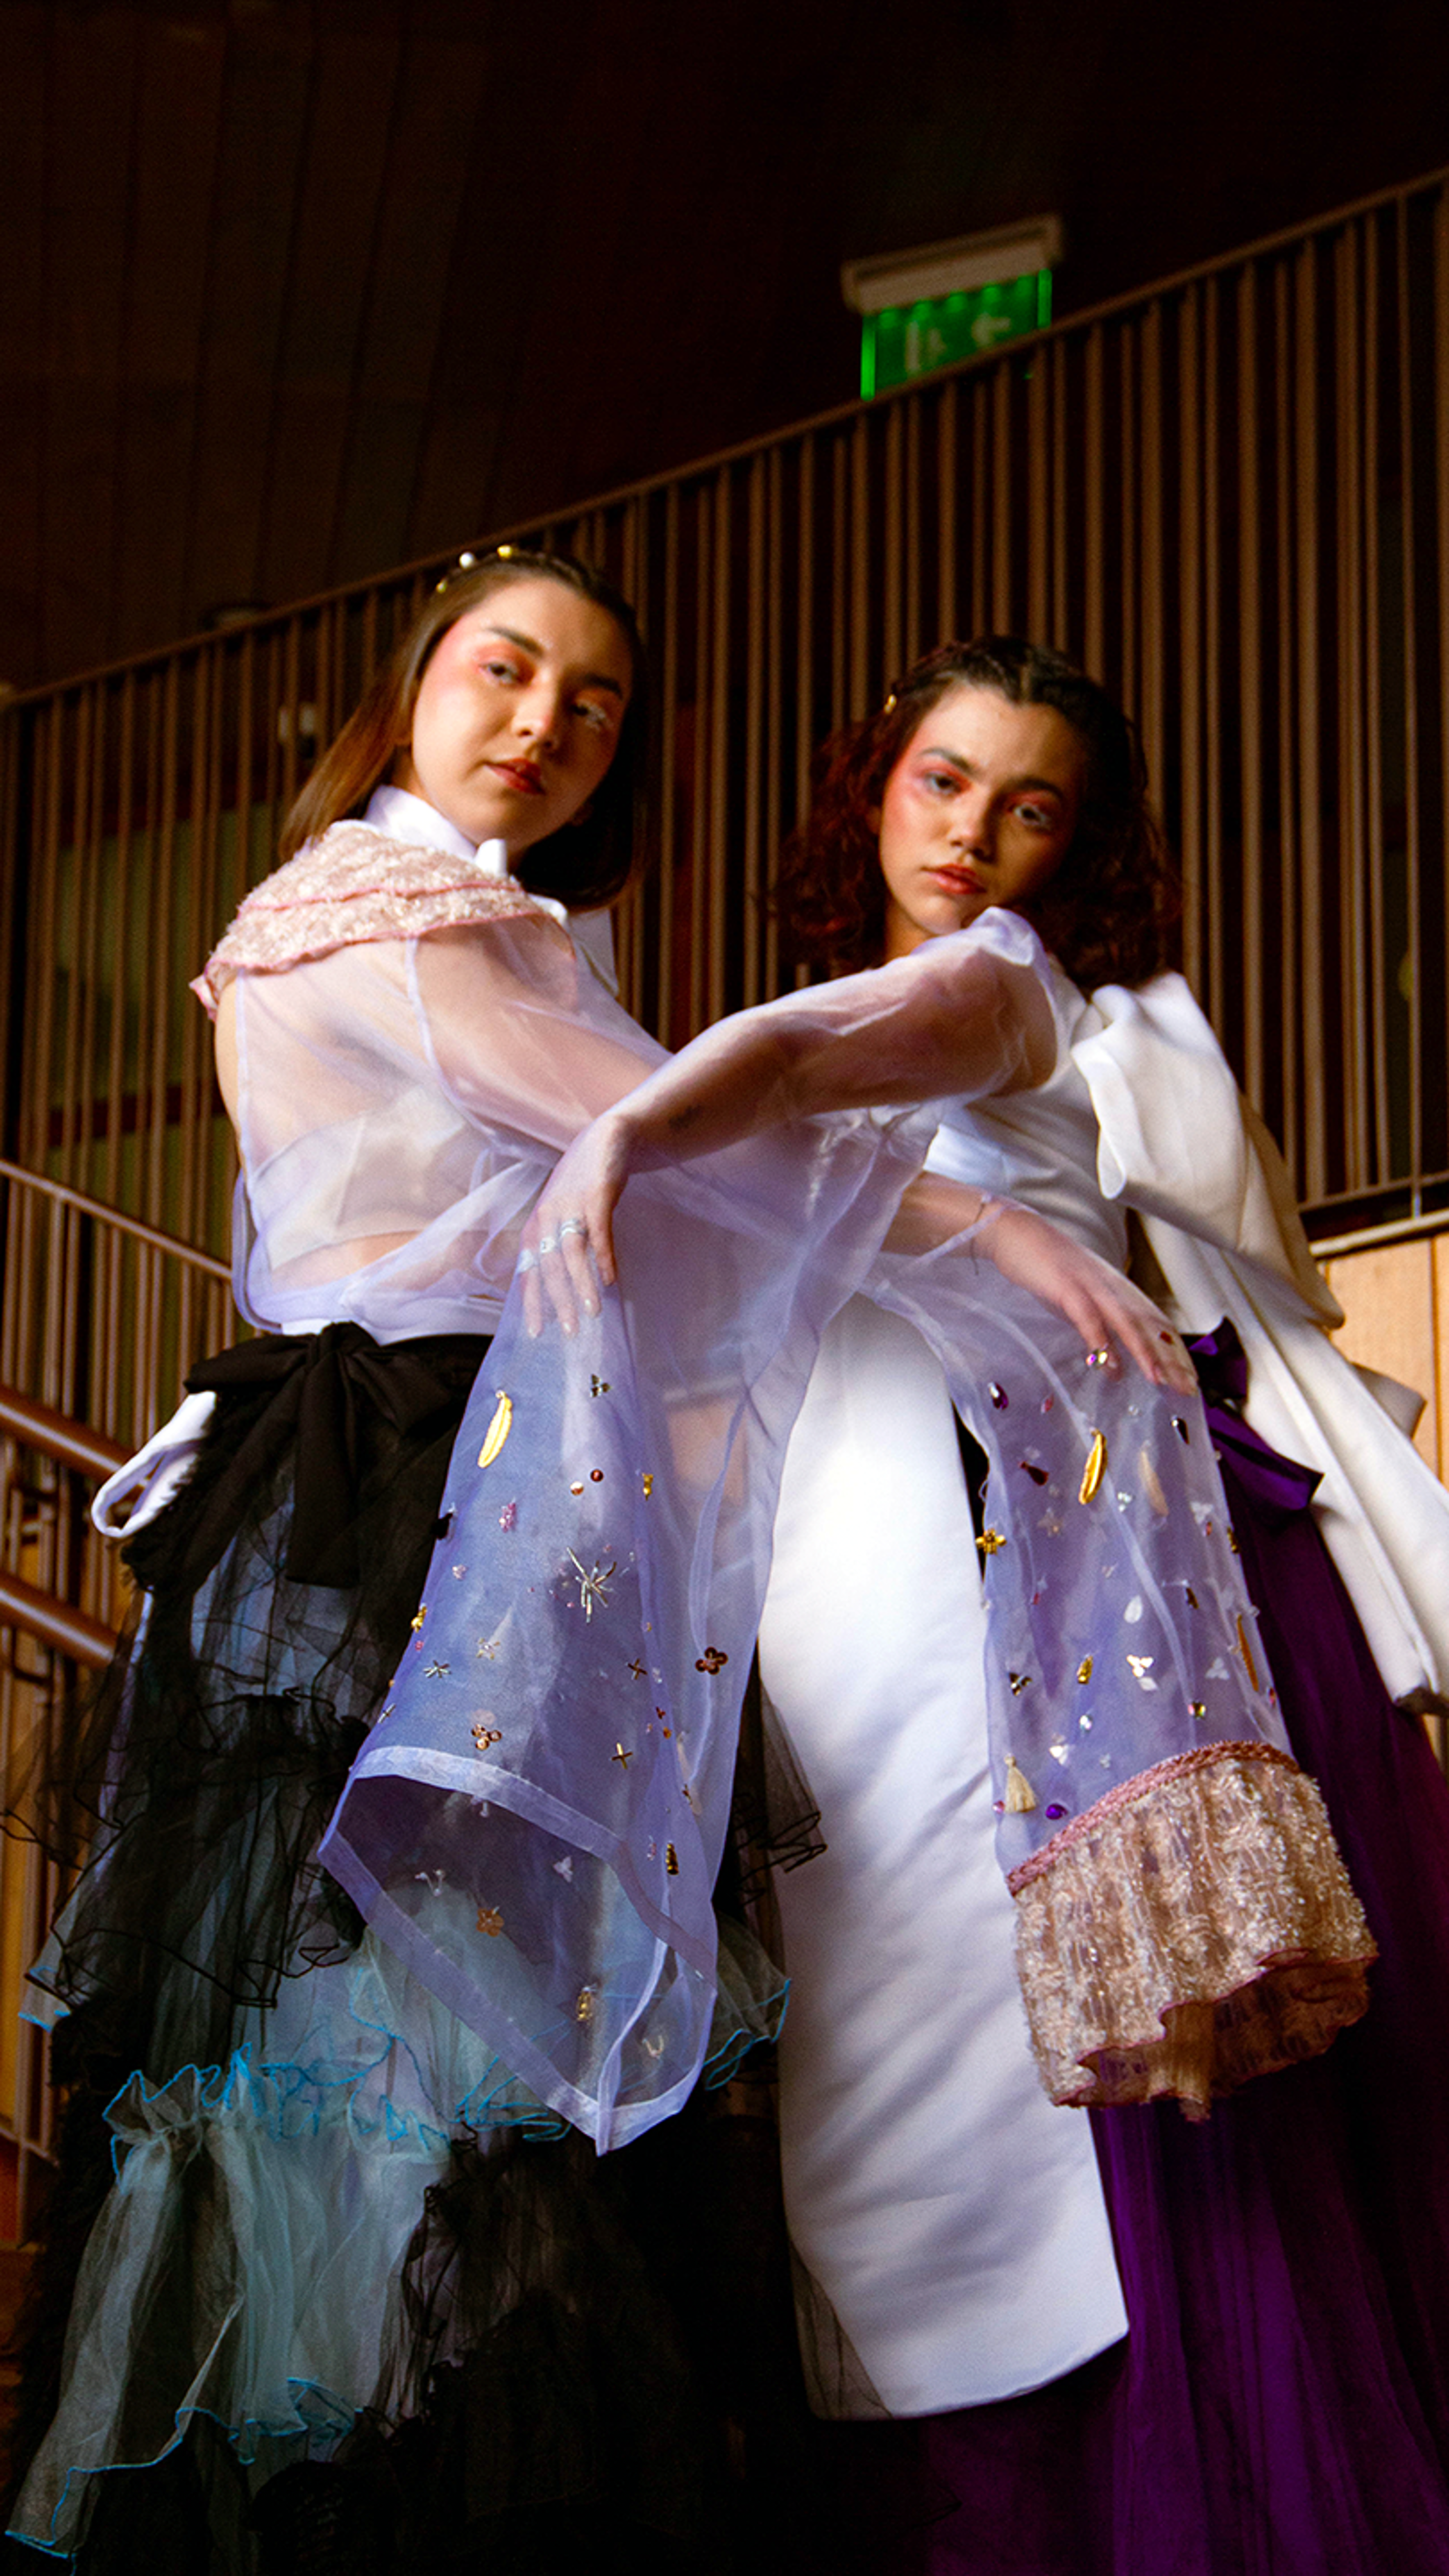 Two models poised confidently in eclectic high-fashion ensembles, exhibiting contrasting fabrics and textures against a wooden paneled backdrop.